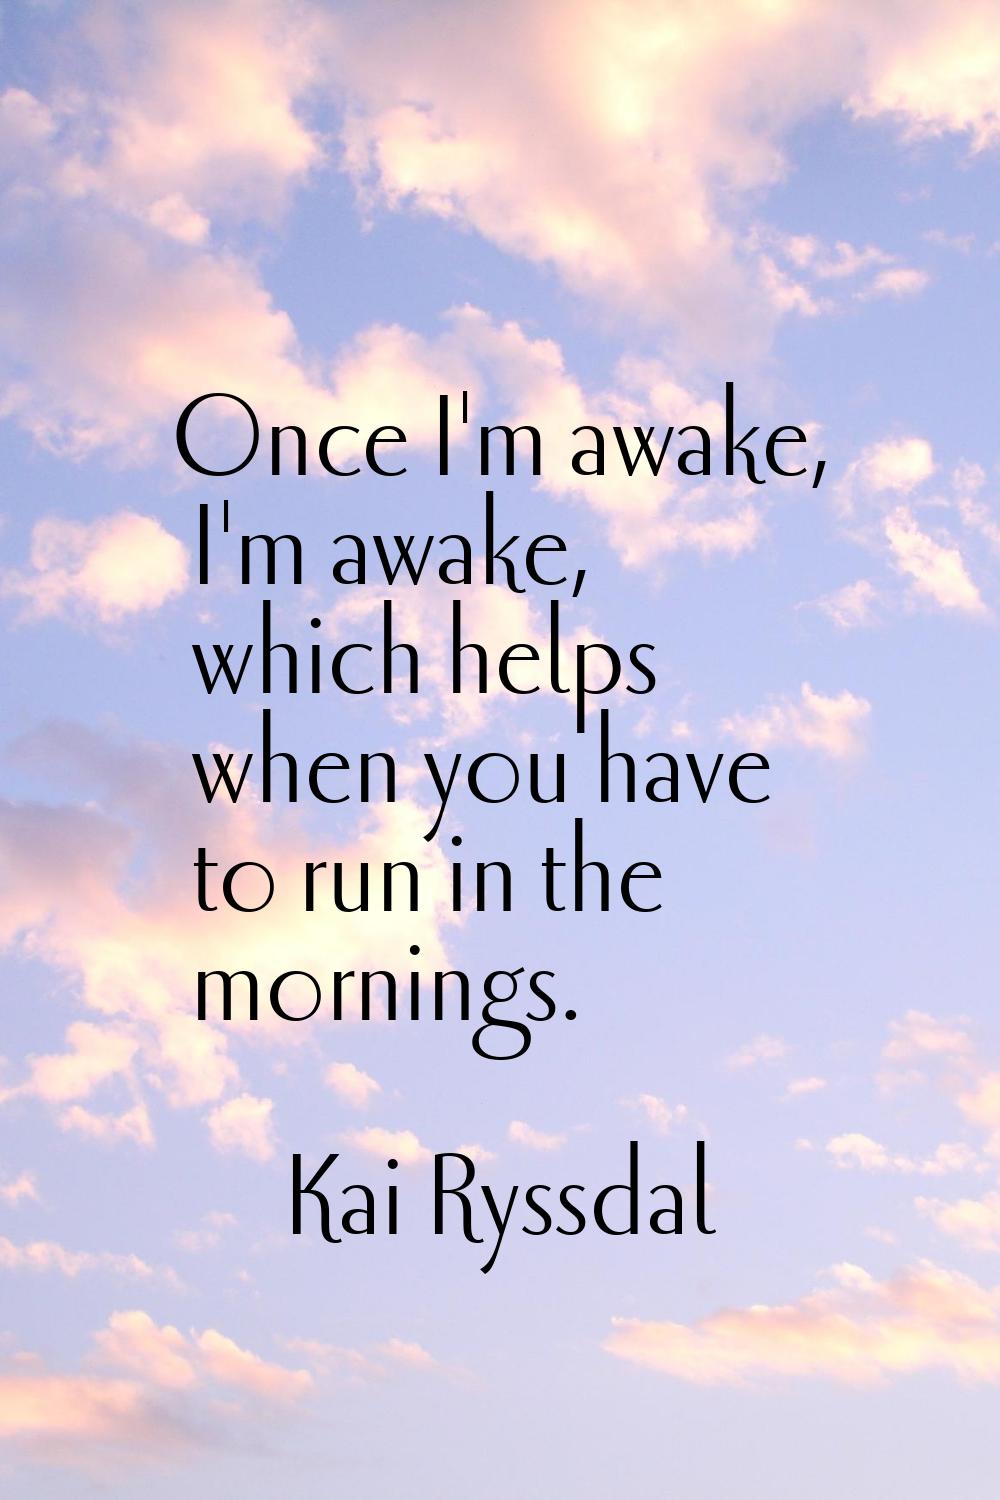 Once I'm awake, I'm awake, which helps when you have to run in the mornings.